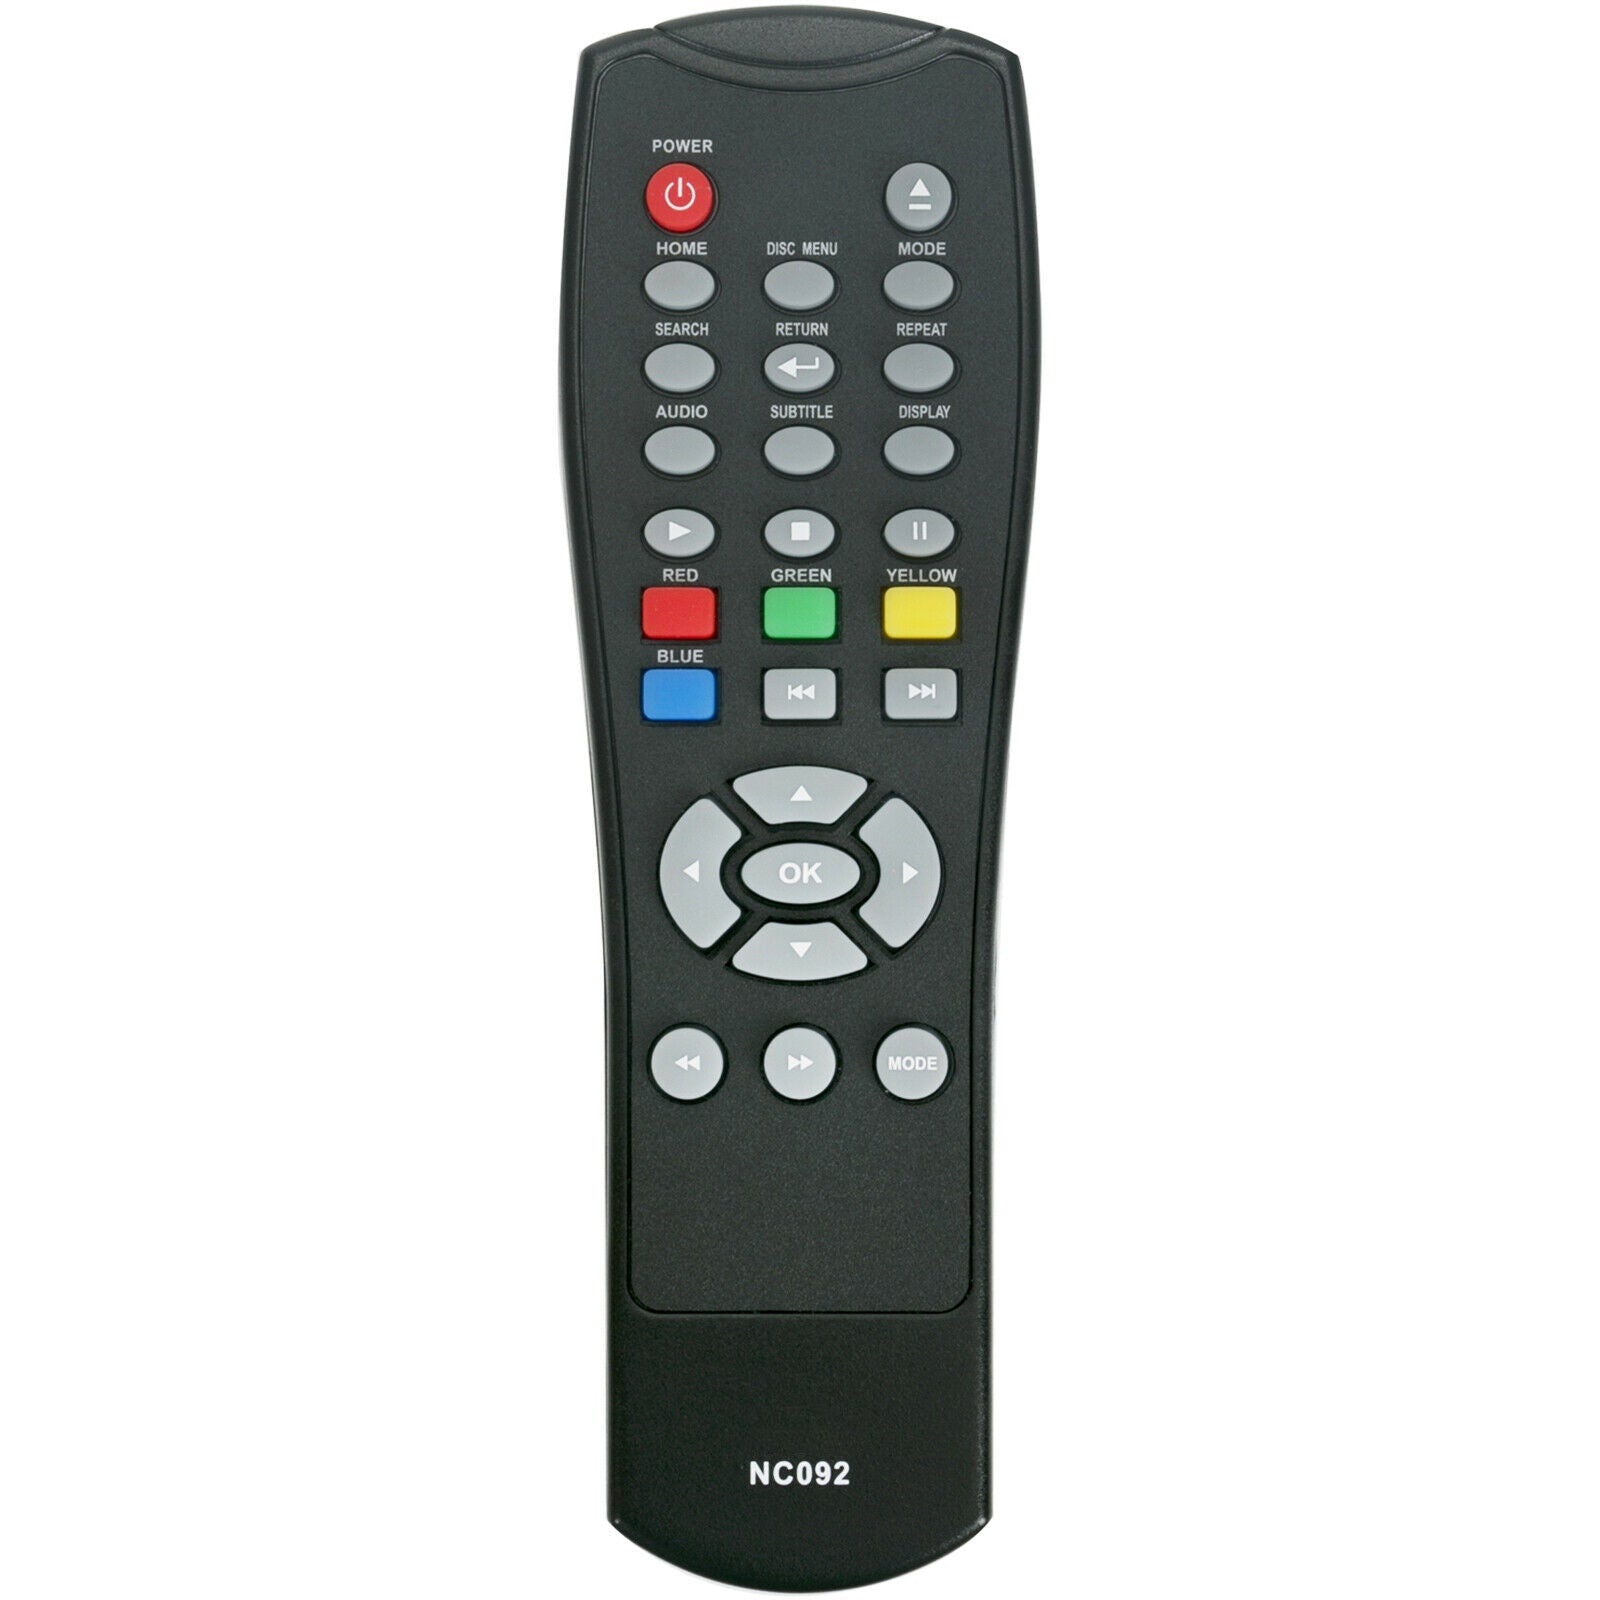 NC092UL NC092 Replacement Remote for Sanyo Blu-ray Disc Player FWBP505F FWBP505FN